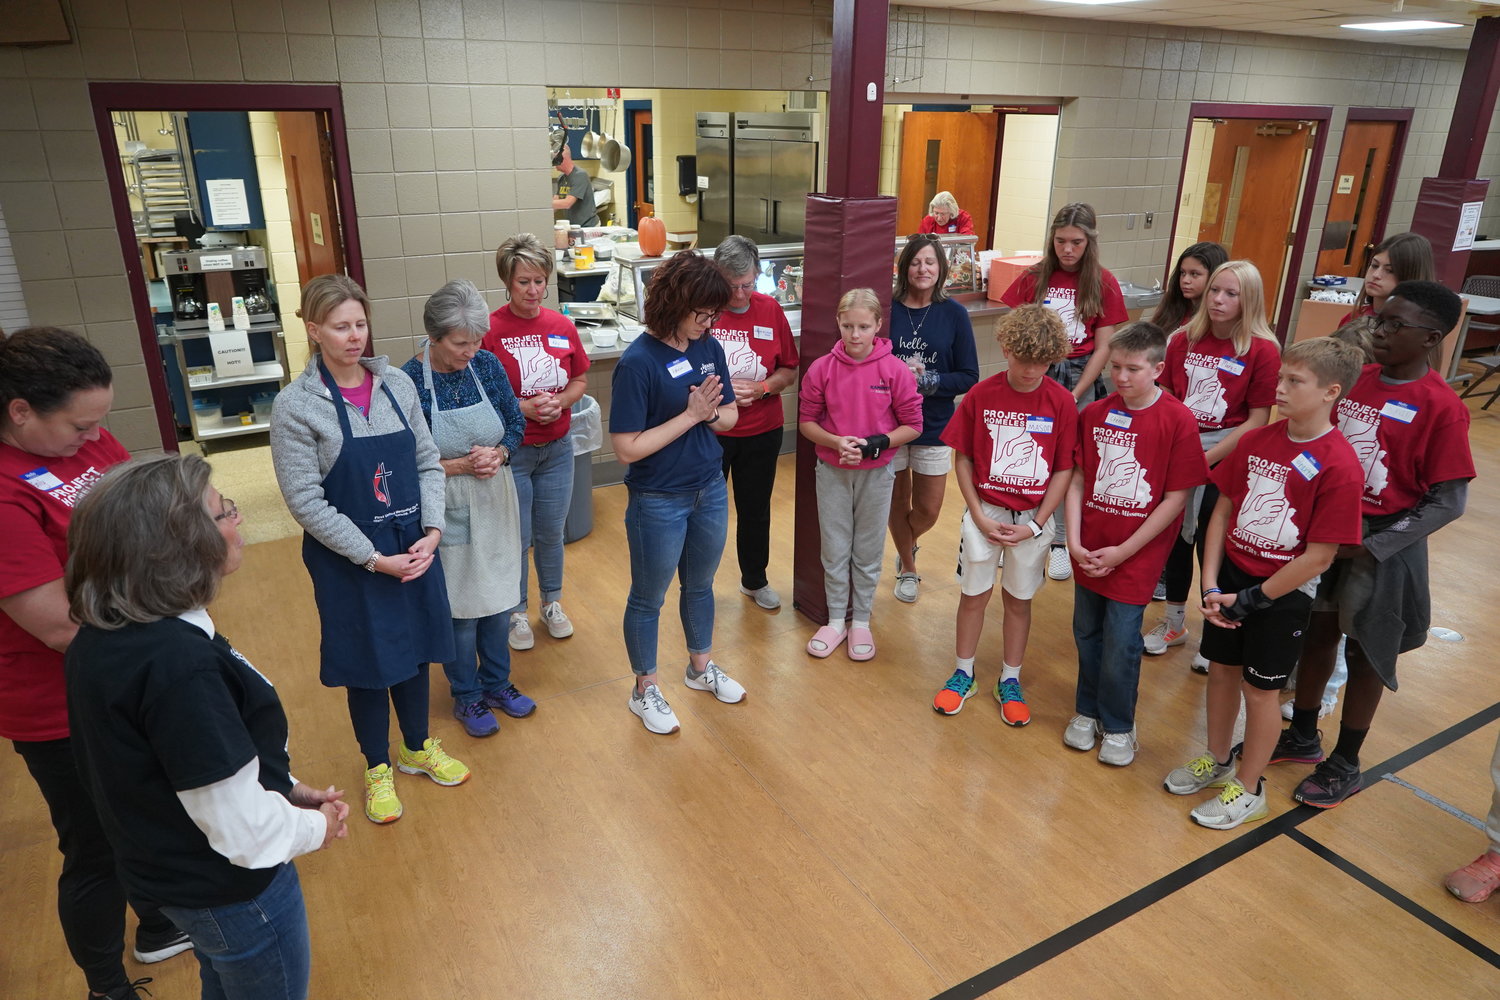 Adults from Immaculate Conception Parish and seventh-graders from Immaculate Conception School in Jefferson City gather for prayer before serving lunch and greeting visitors in the fellowship hall of First United Methodist Church during Project Homeless Connect in Jefferson City.